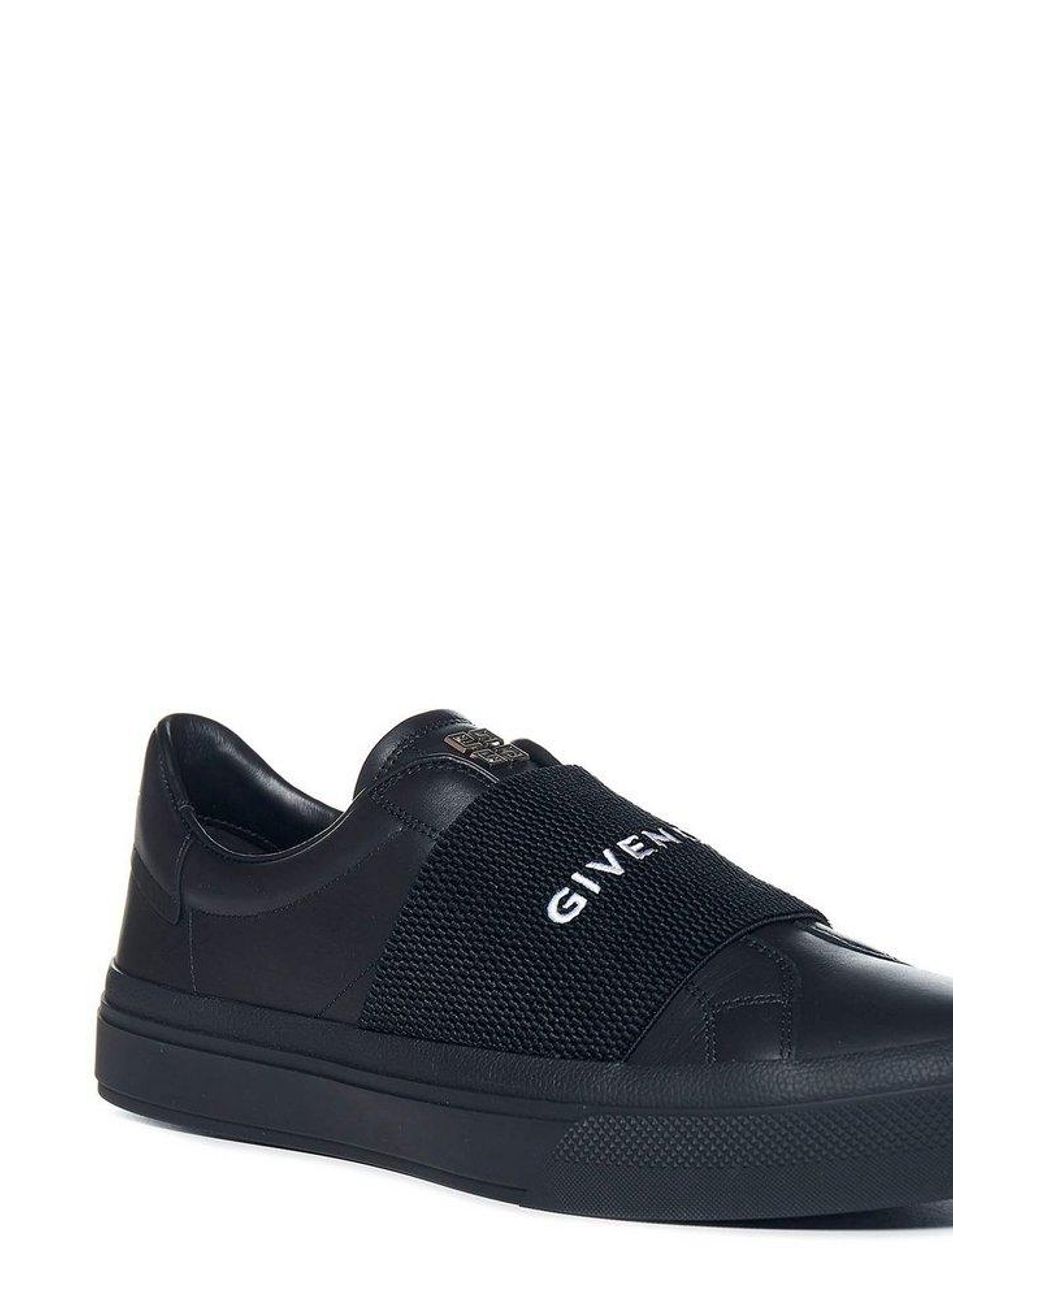 Logo leather sneakers in white - Givenchy Kids | Mytheresa